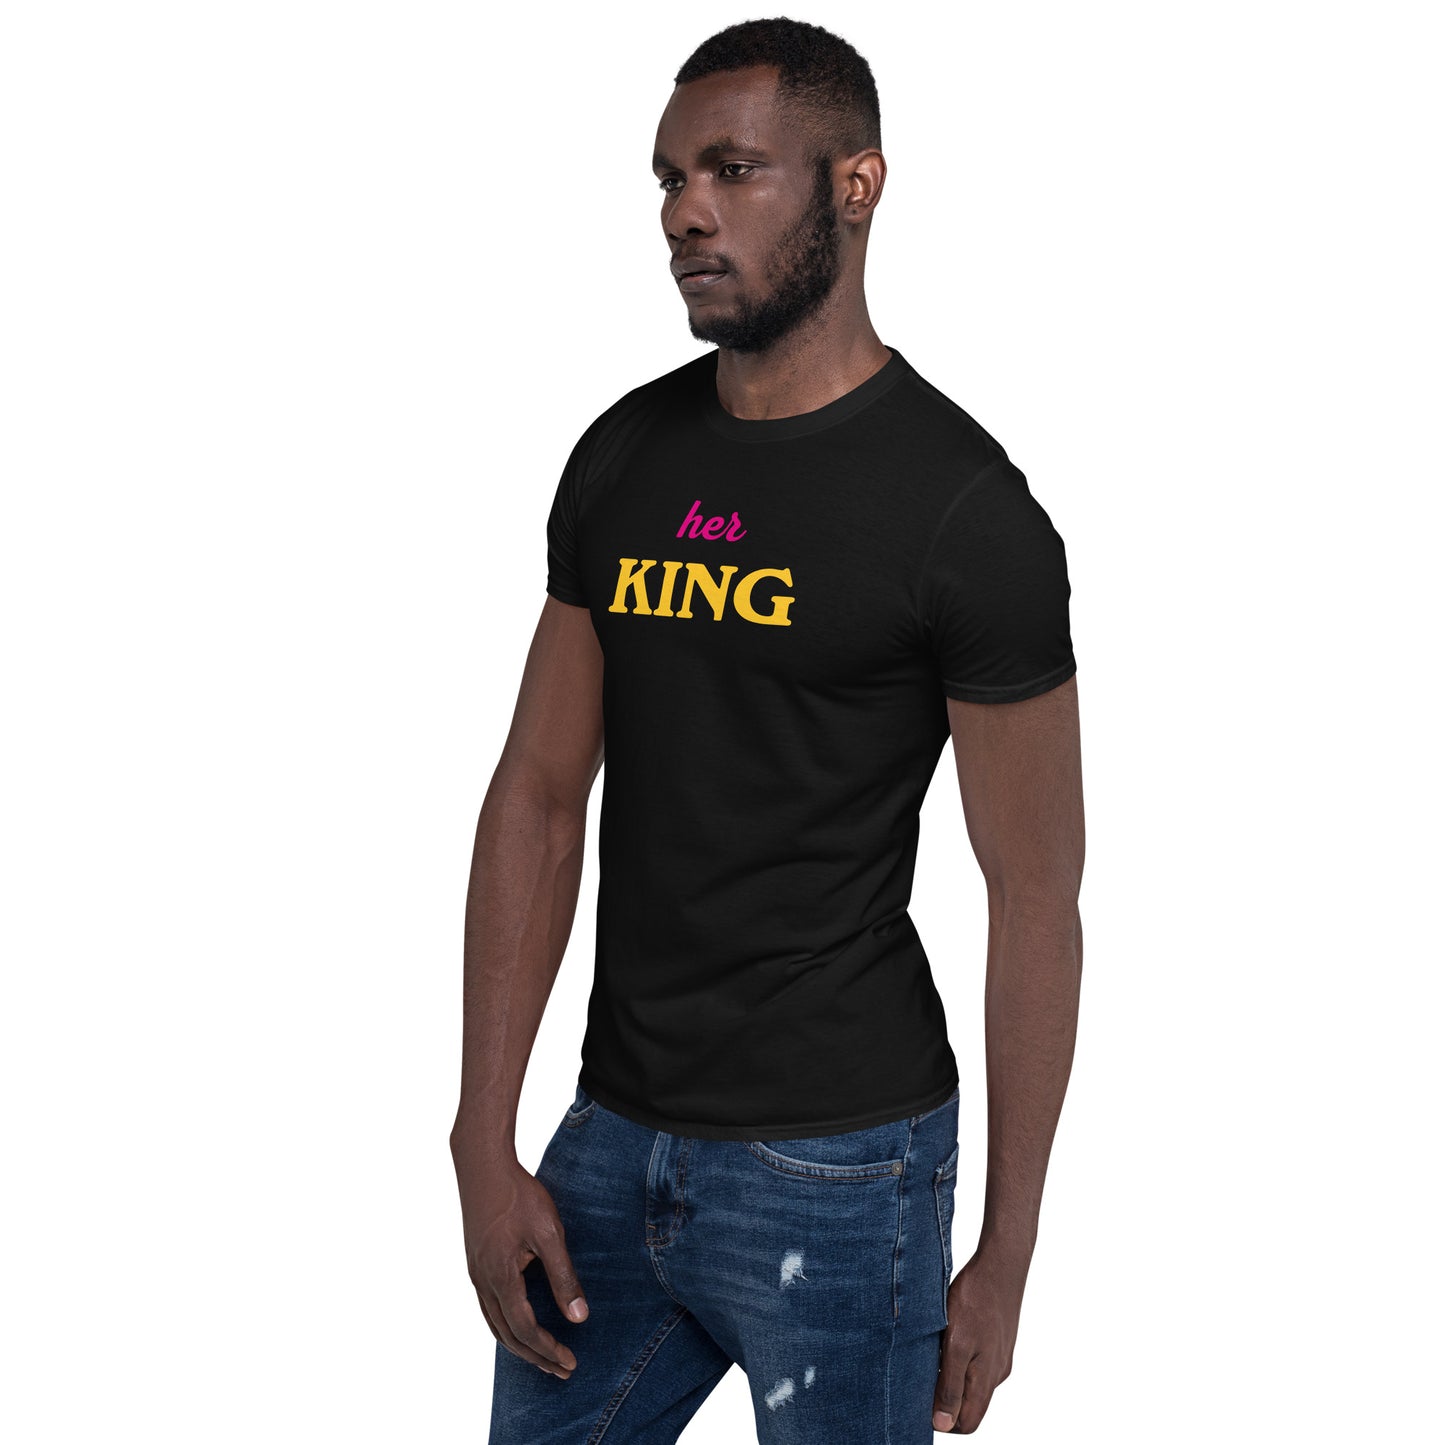 Her King Softstyle T-Shirt black